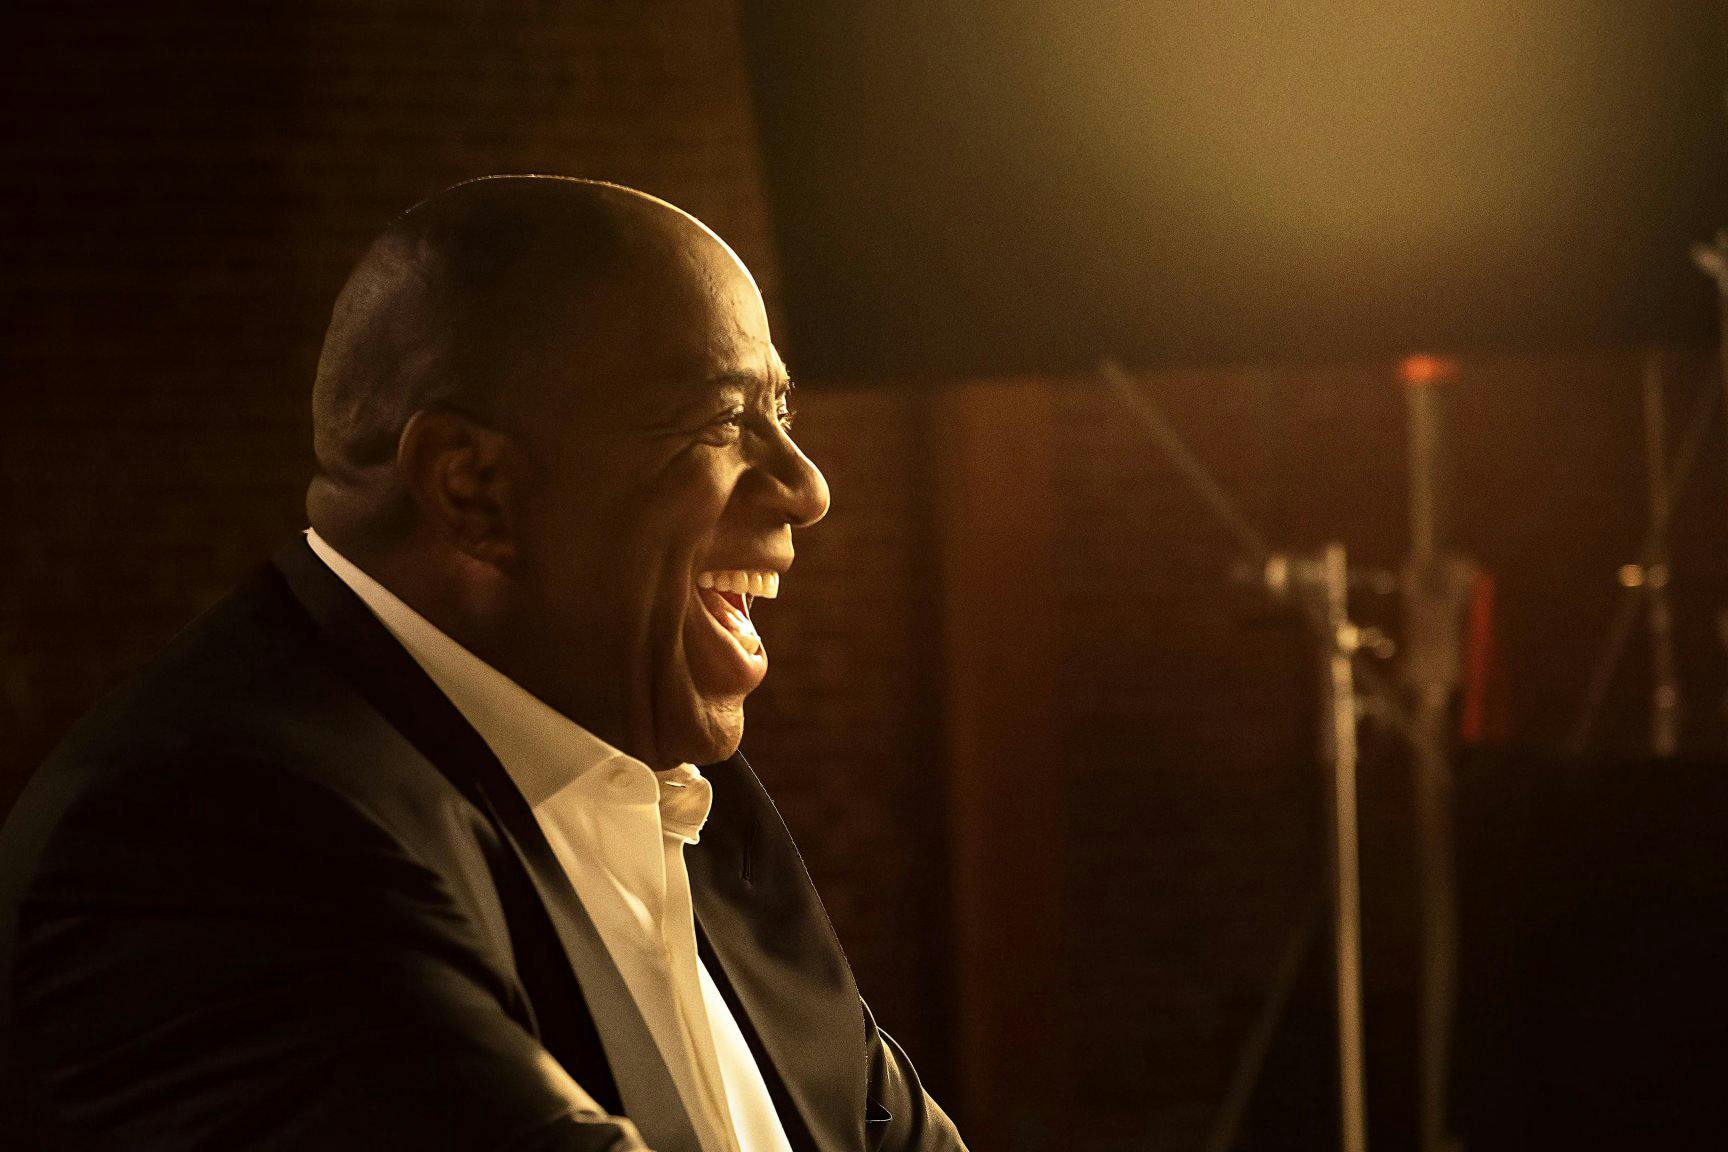 The new docuseries chronicles Earvin "Magic" Johnson's life and legacy in the NBA.